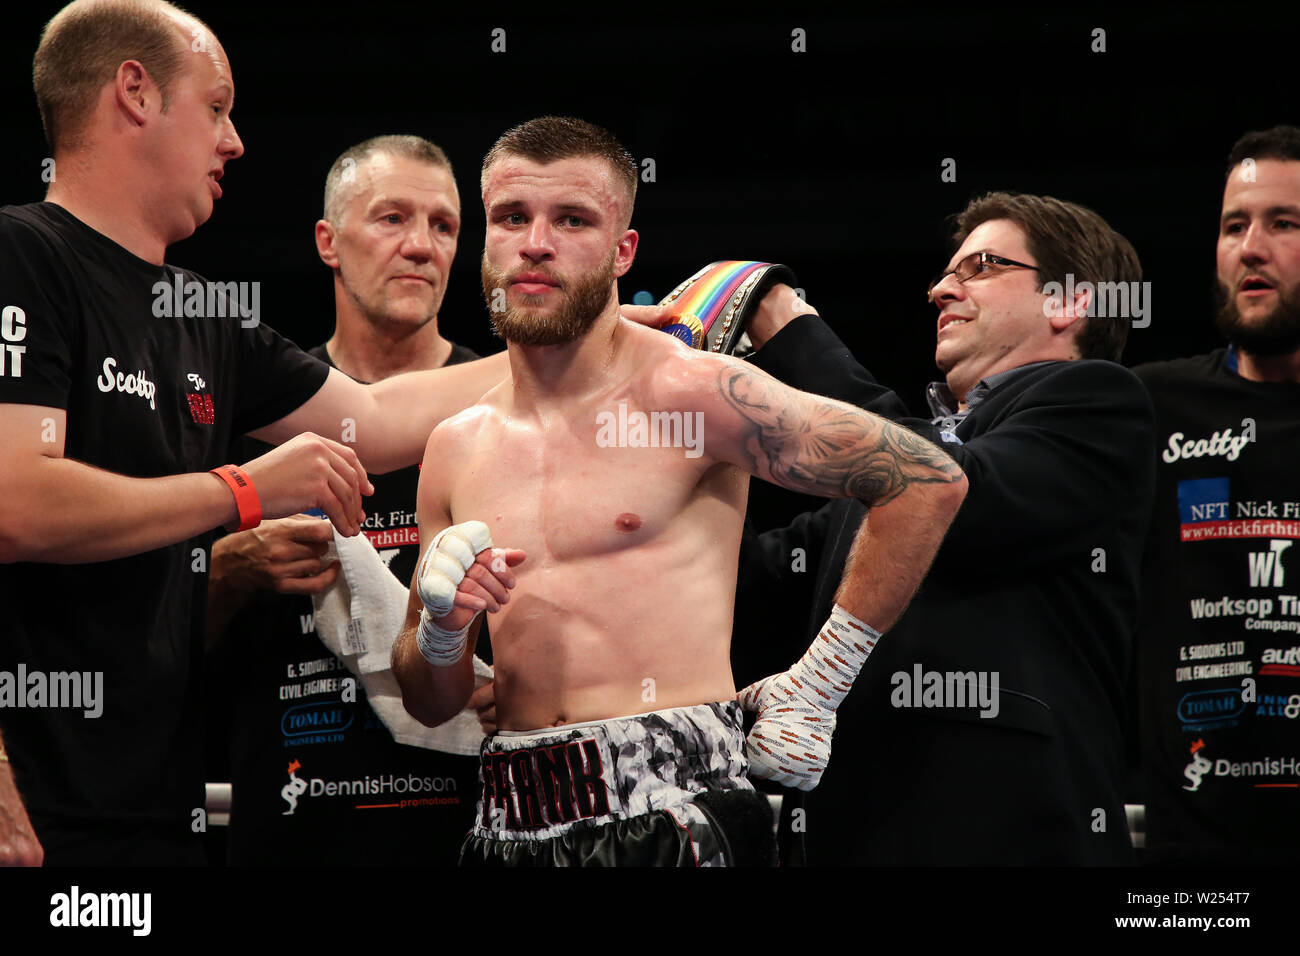 Tommy Frank celebrates beating John Chuwa during the Dennis Hobson Promotions boxing event at Ponds Forge, Sheffield. Picture date: 5th July 2019. Pic Stock Photo